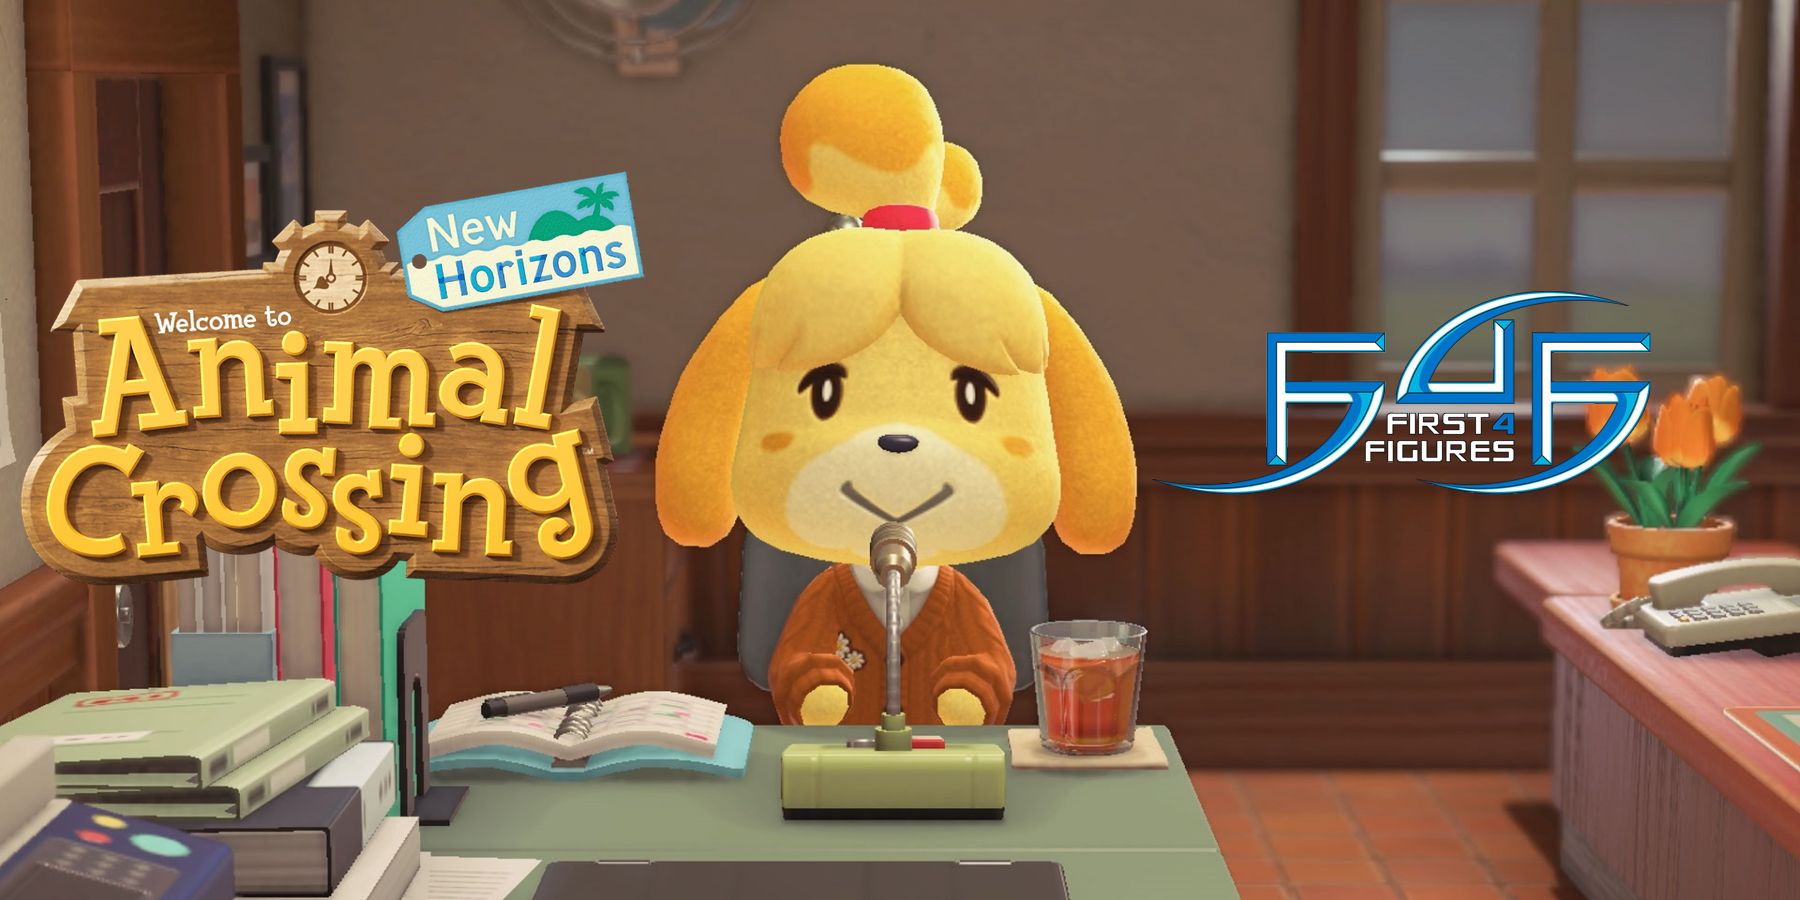 A screenshot of Animal Crossing: New Horizons' Isabelle, overlayed with the New Horizons and First 4 Figures logos.